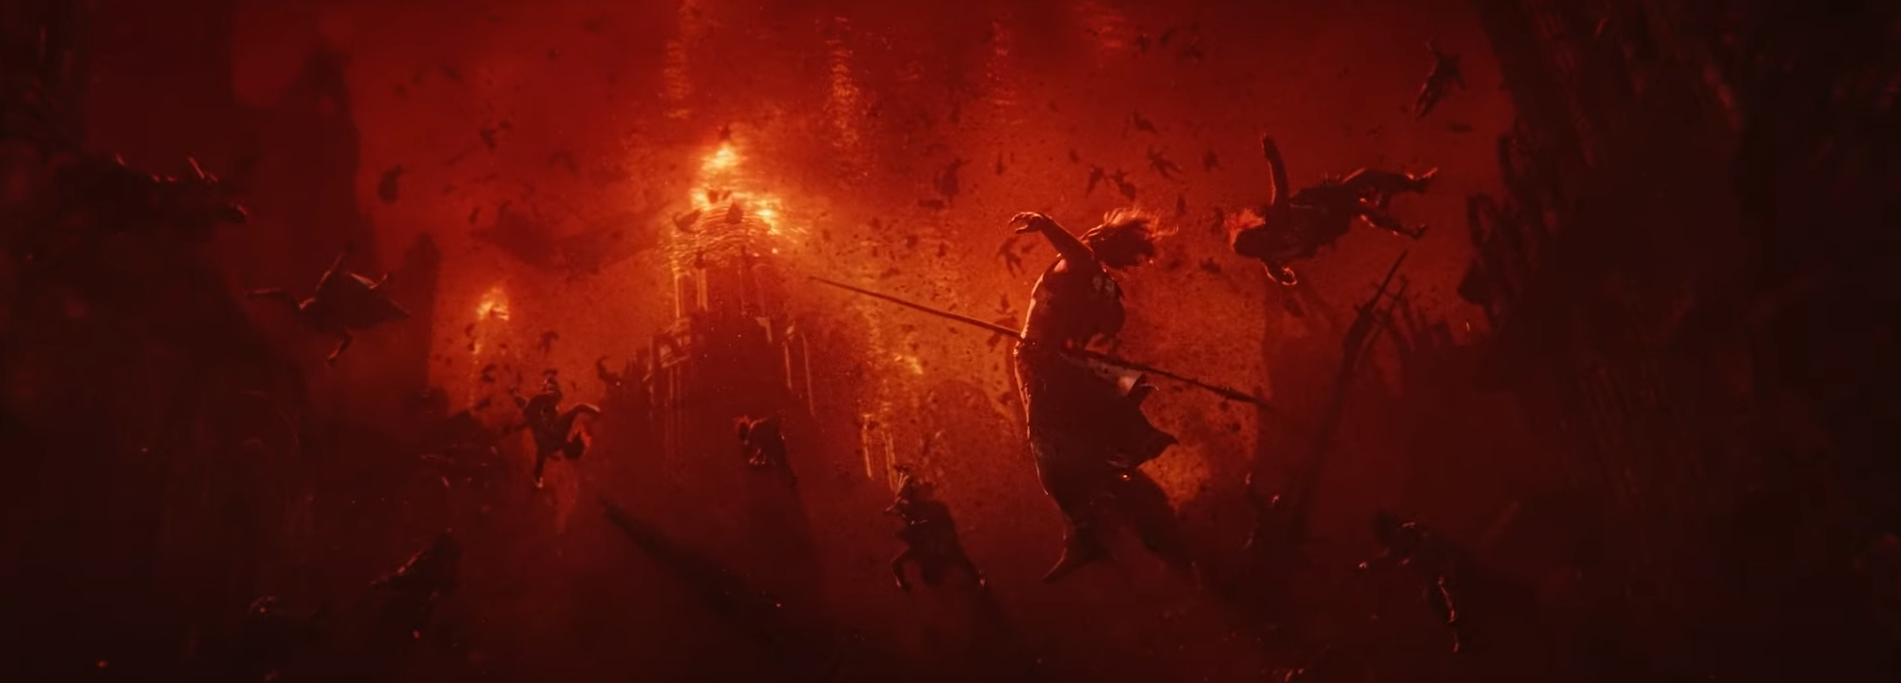 The Lord of the Rings: The Rings of Power' Official Trailer